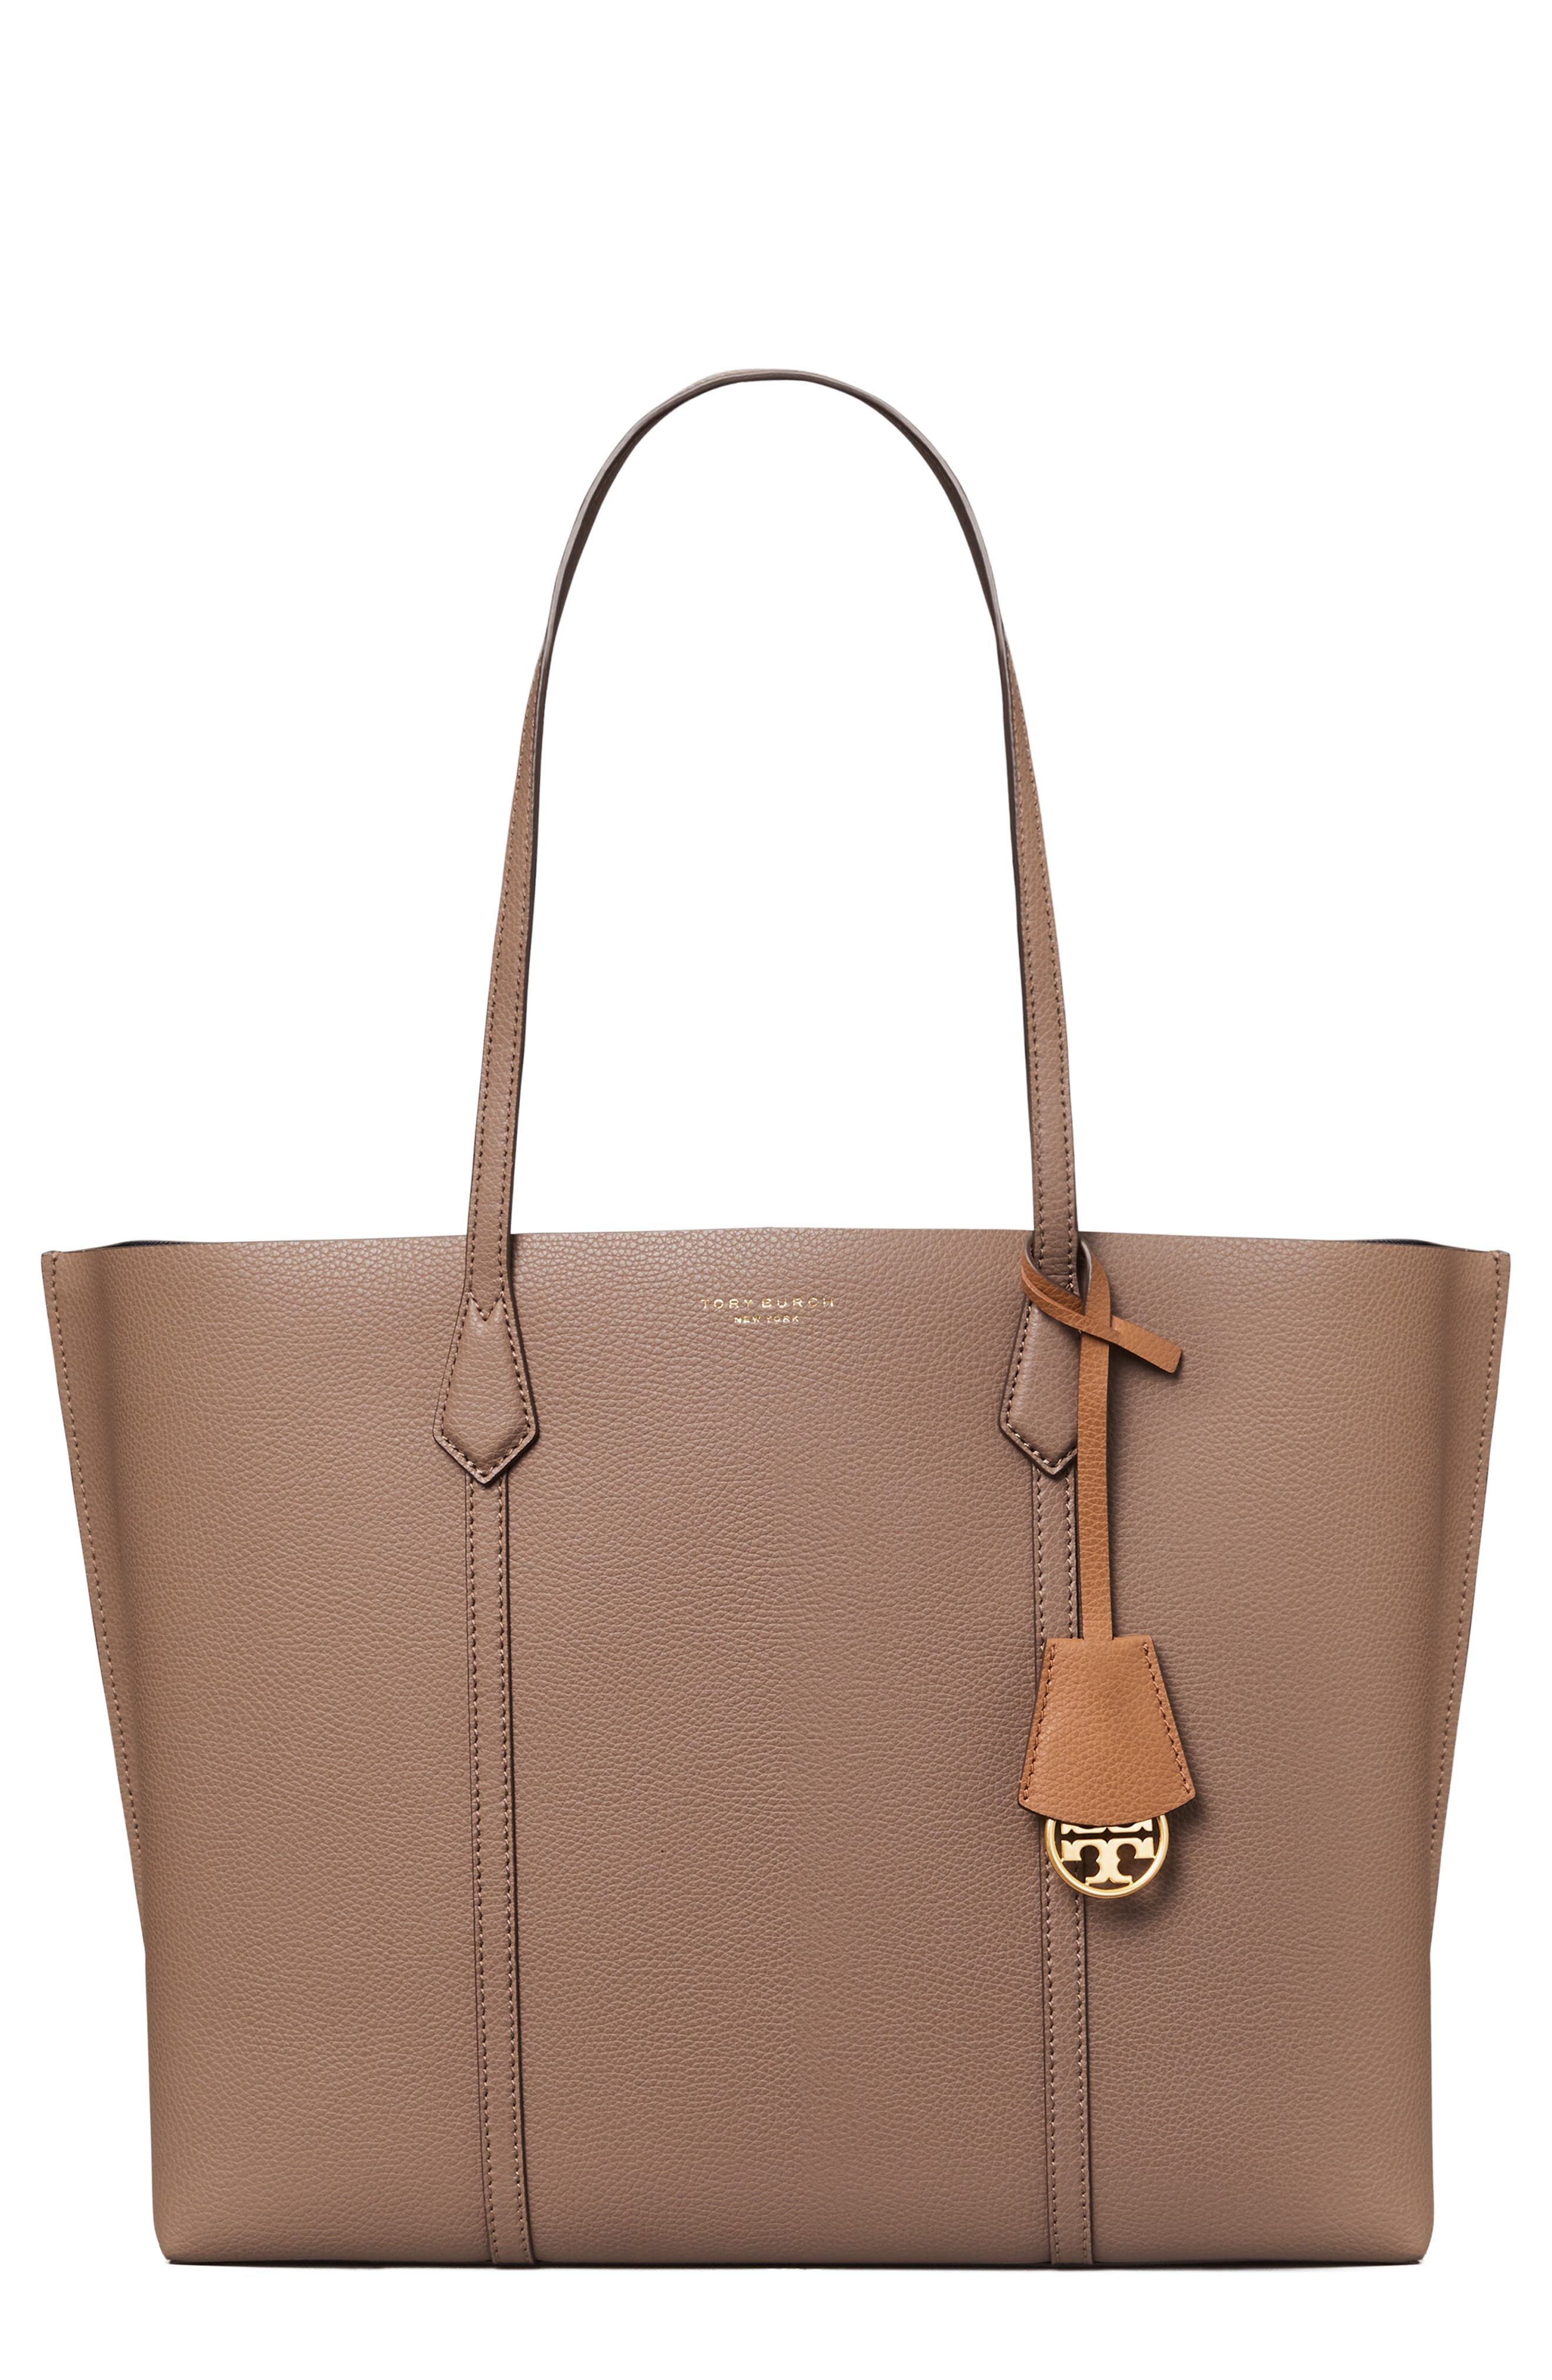 PERRY SMALL TRIPLE-COMPARTMENT LEATHER TOTE BAG